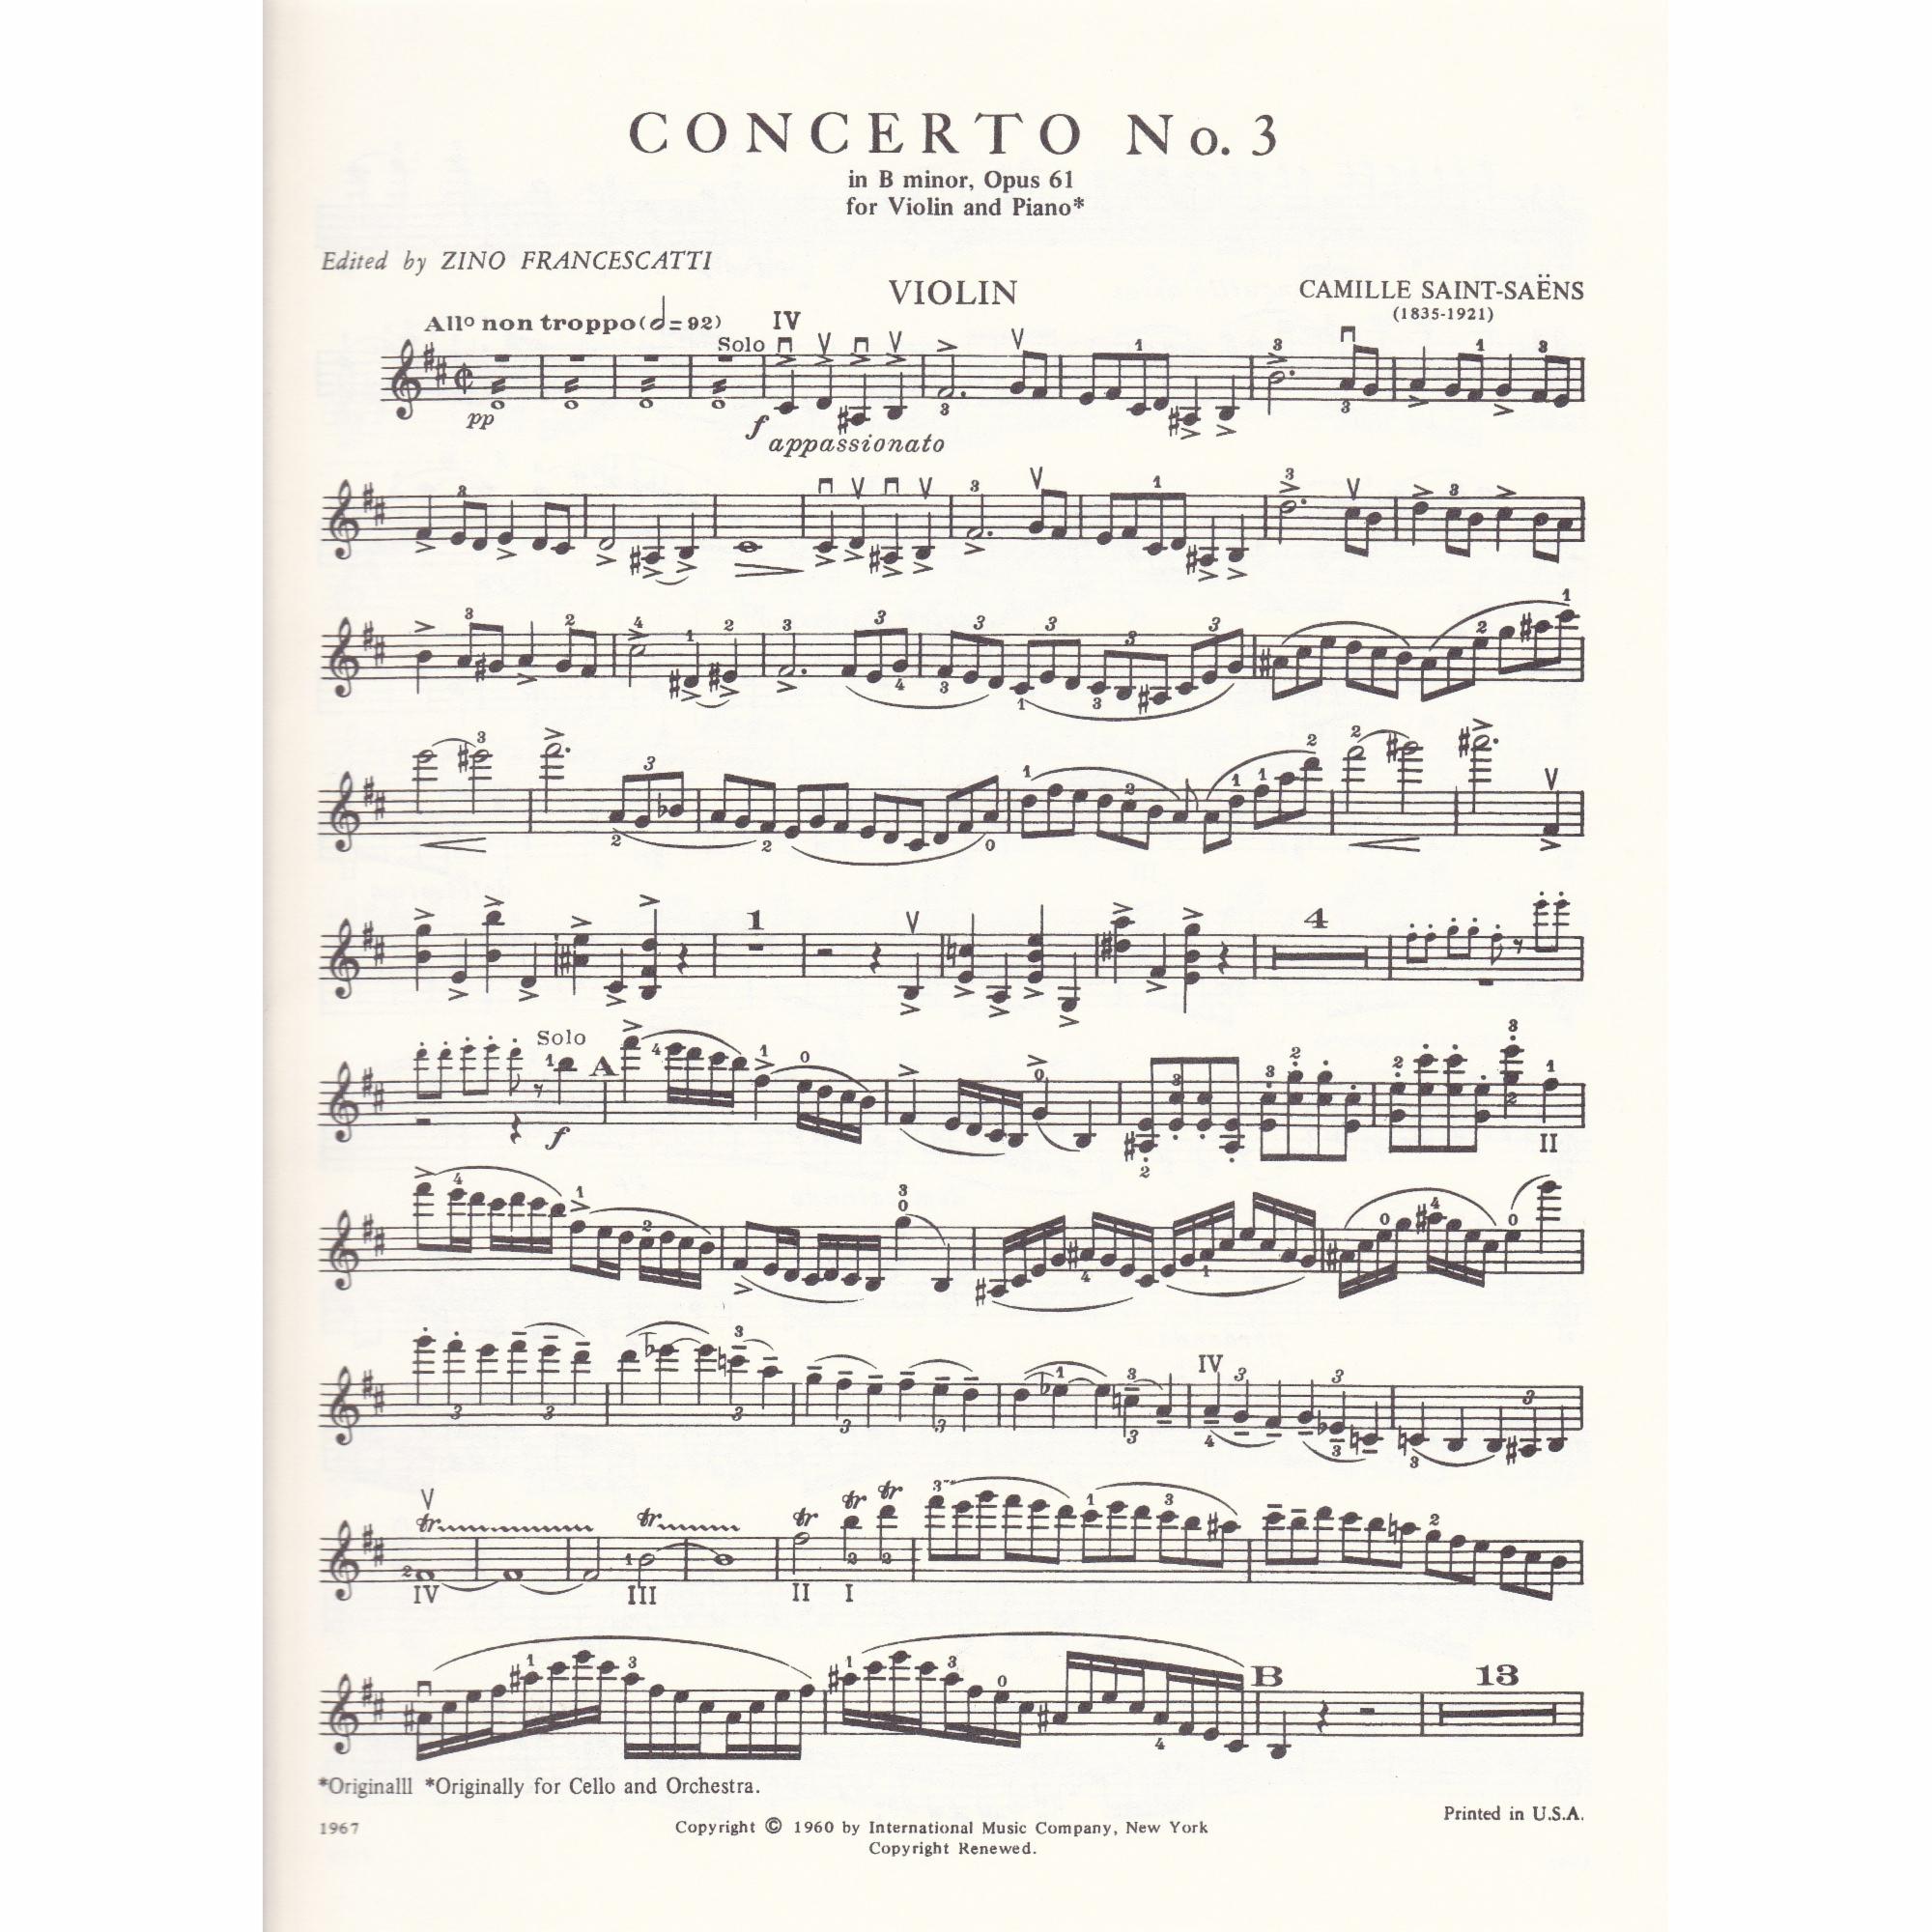 Saint-Saens -- Concerto No. 3 in B Minor, Op. 61 for Violin and Piano